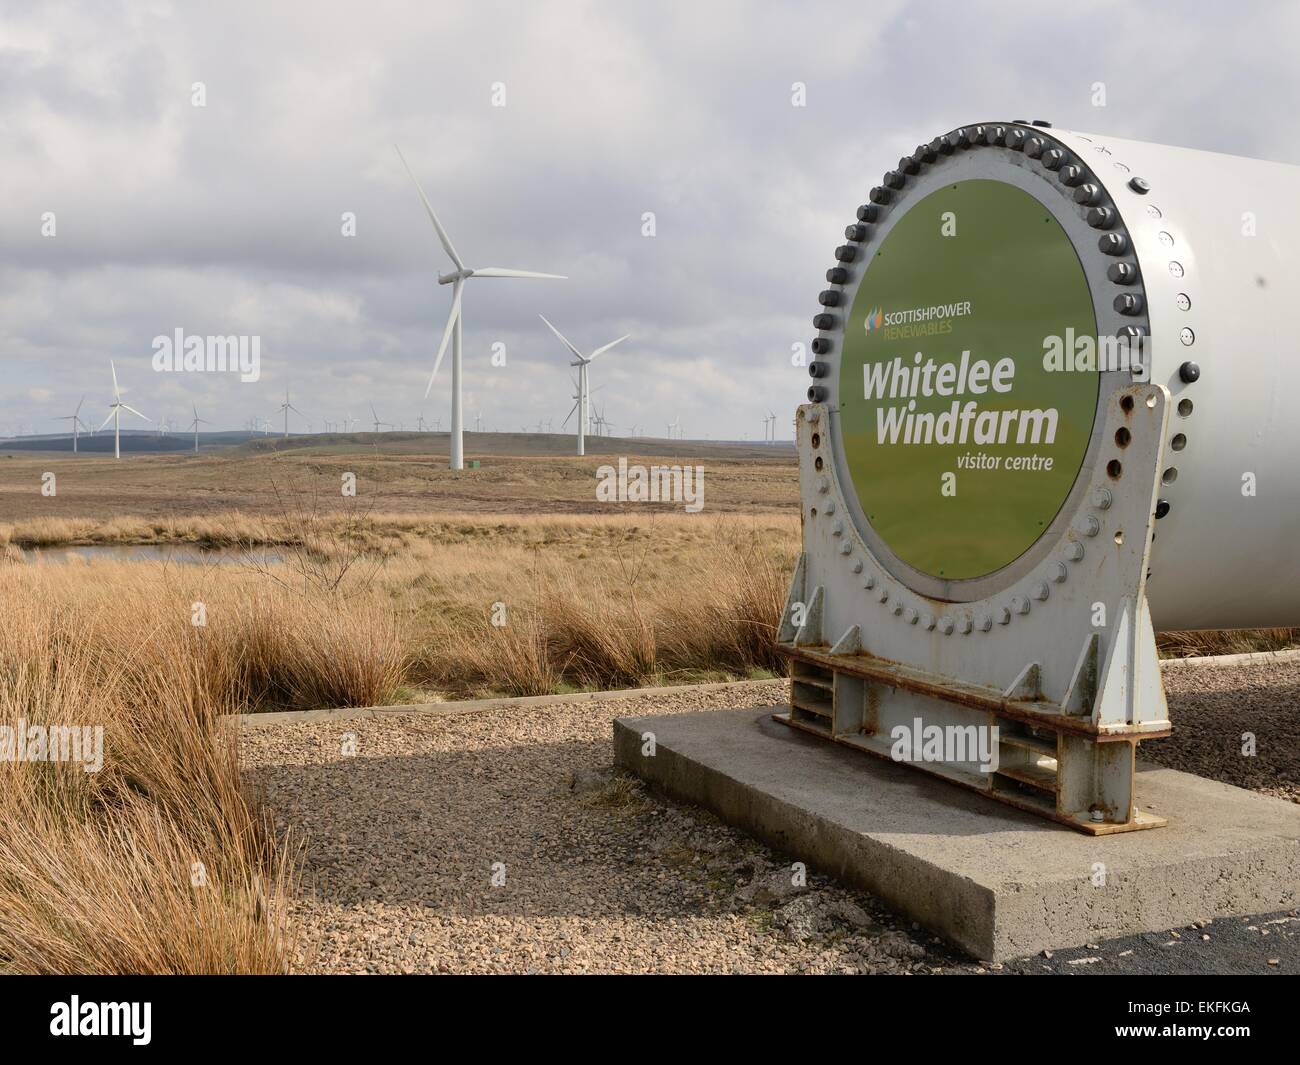 Turbine blade with bolts surrounding the Whitelee windfarm visitor centre entrance sign. Stock Photo